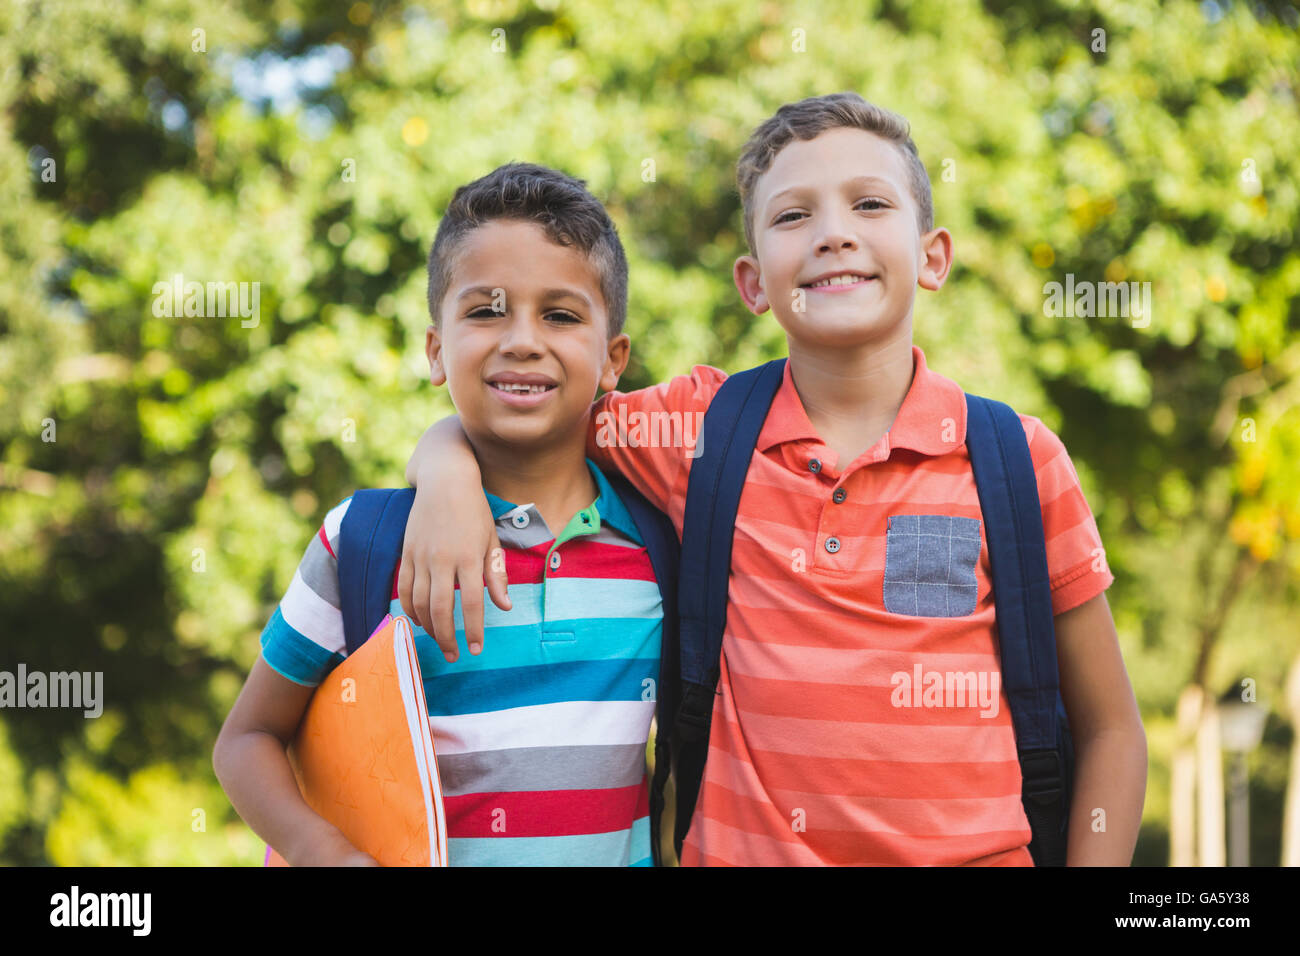 Smiling schoolkids standing in campus Stock Photo